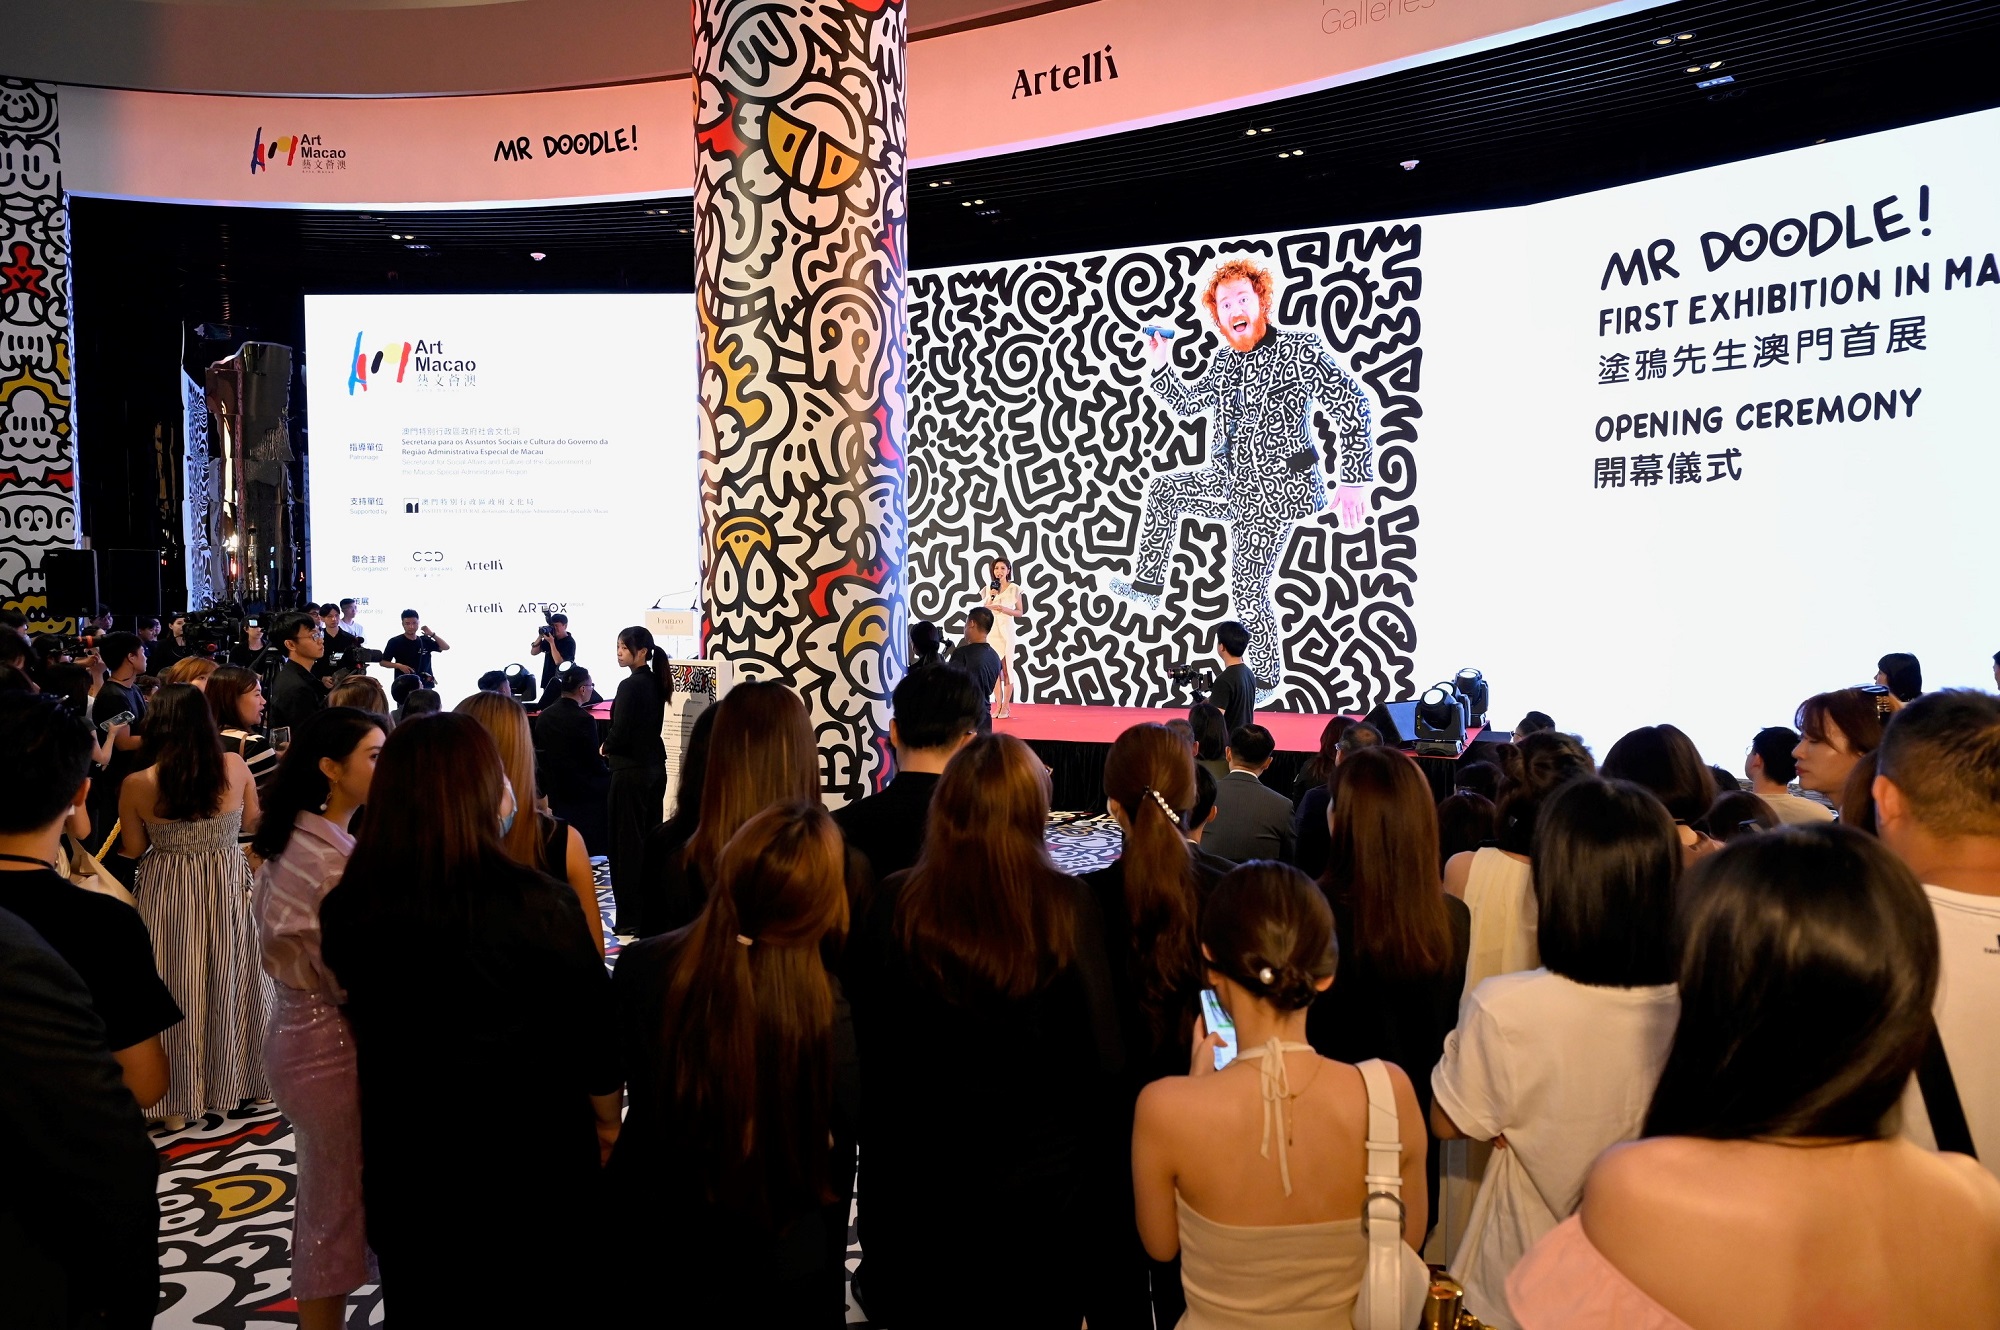 A lively atmosphere with full of crowd at “Mr Doodle First Exhibition in Macao” Opening Ceremony